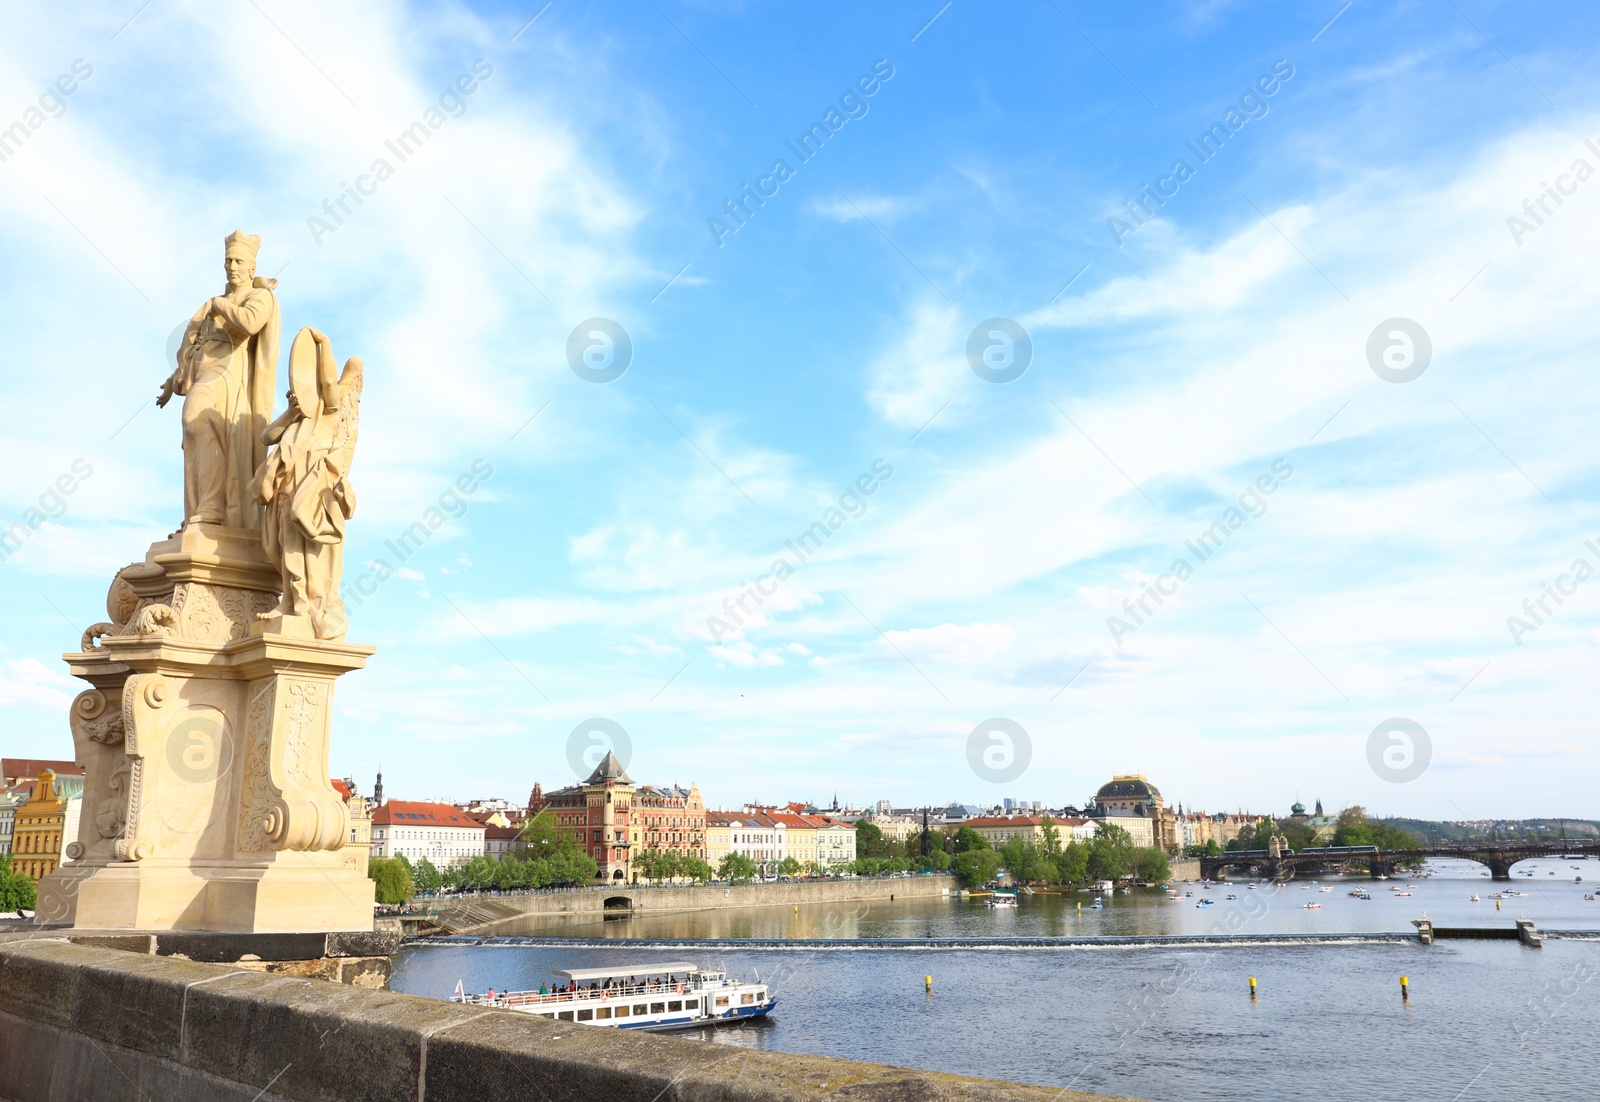 Photo of PRAGUE, CZECH REPUBLIC - APRIL 25, 2019: Cityscape with National Theatre from Charles Bridge on Vltava river